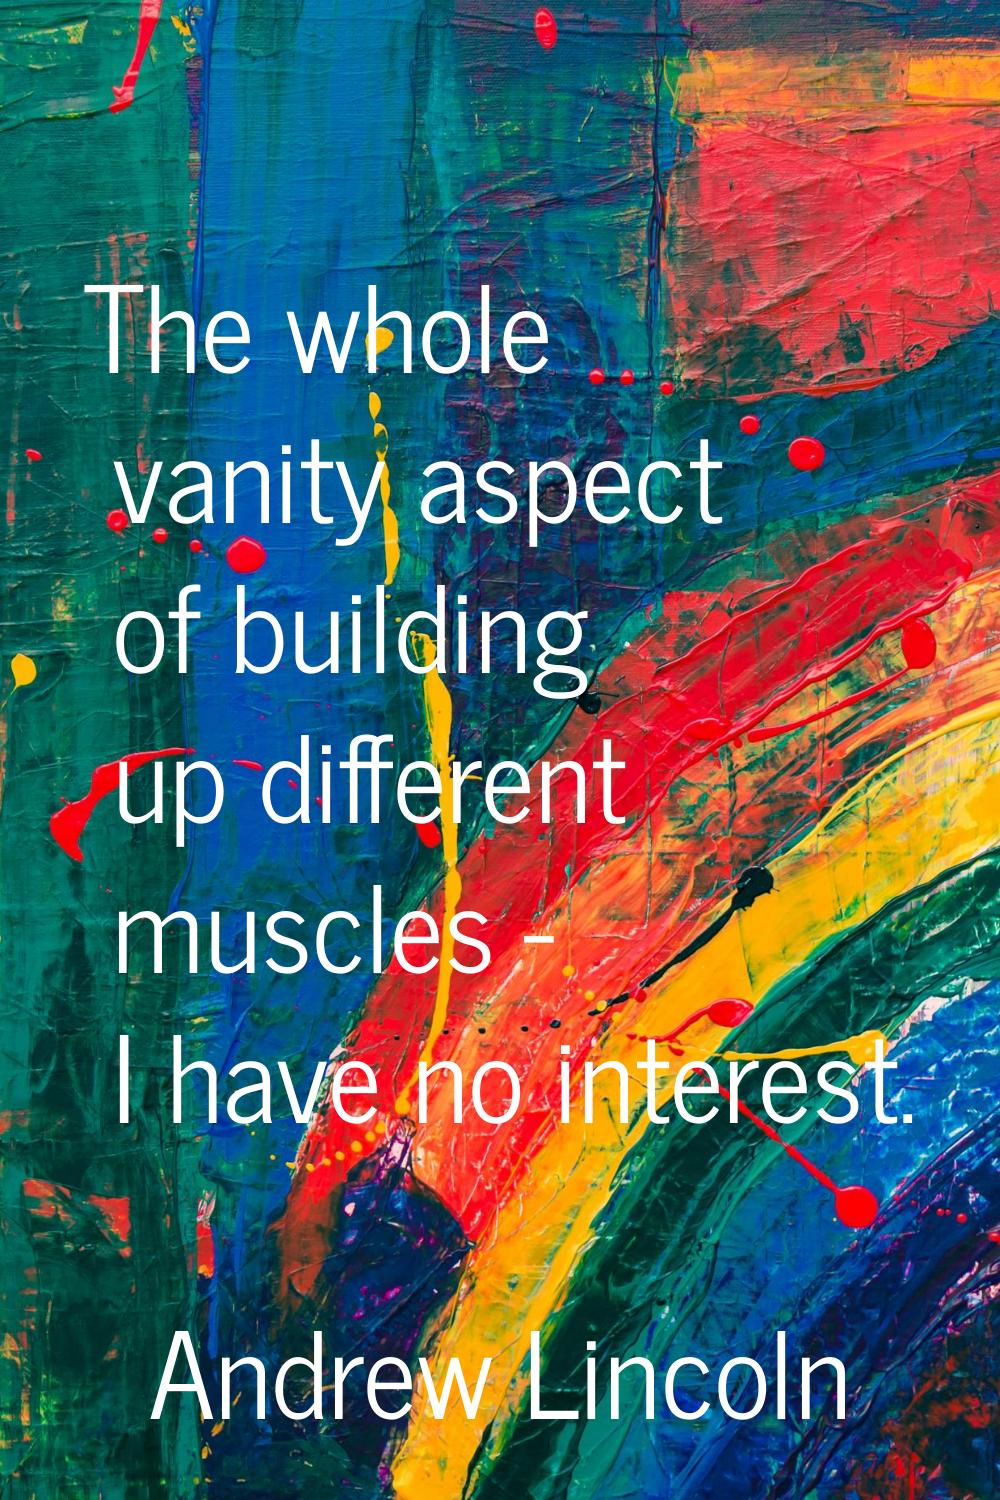 The whole vanity aspect of building up different muscles - I have no interest.